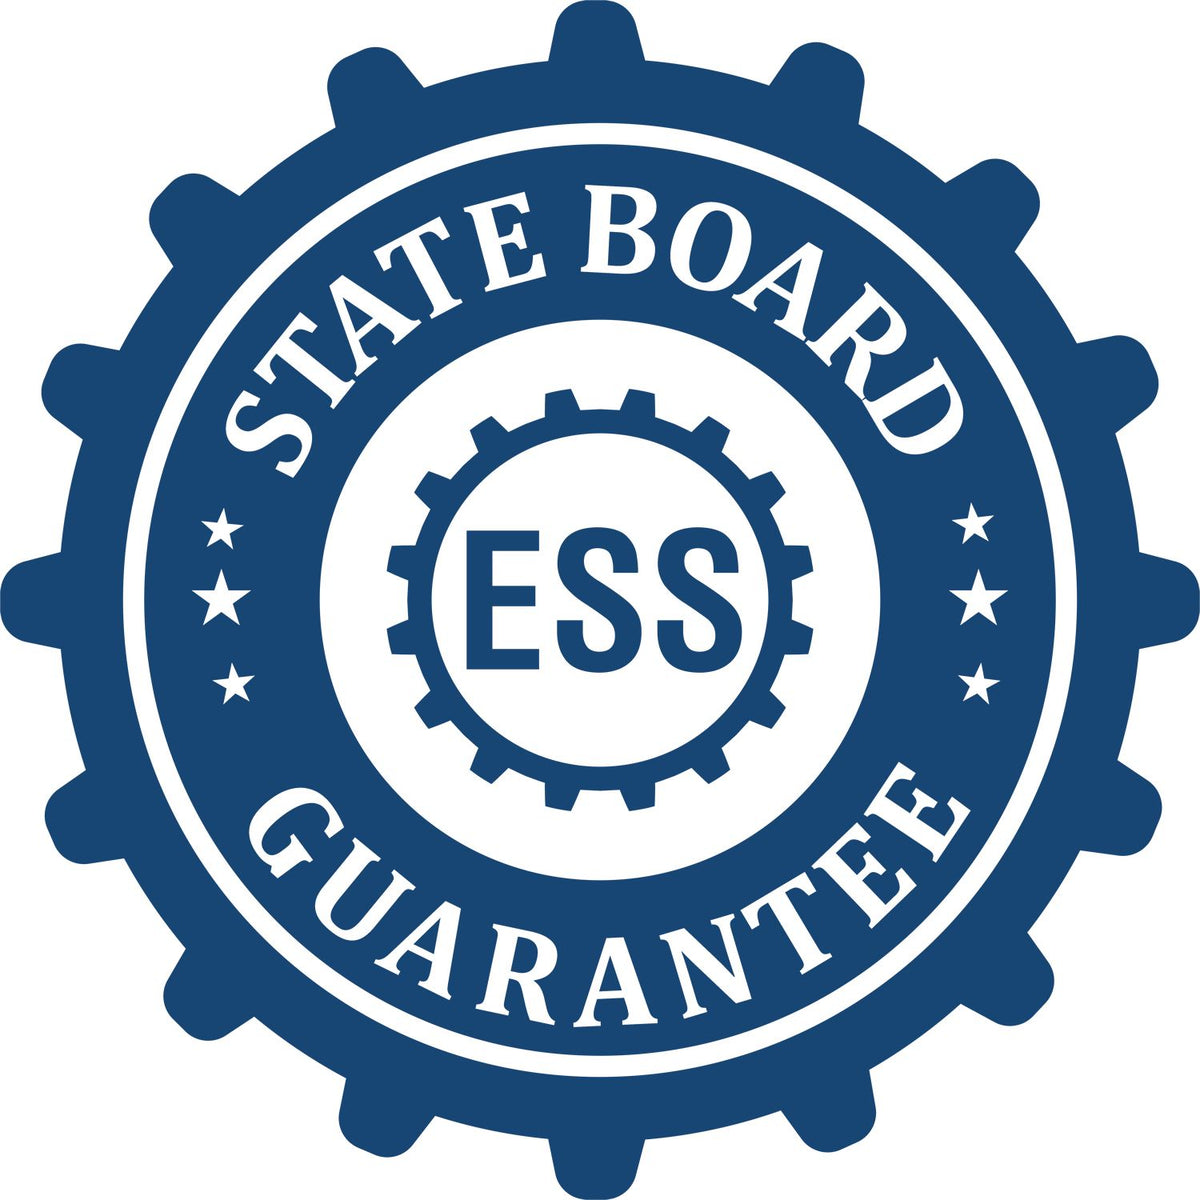 An emblem in a gear shape illustrating a state board guarantee for the Arizona Landscape Architectural Seal Stamp product.